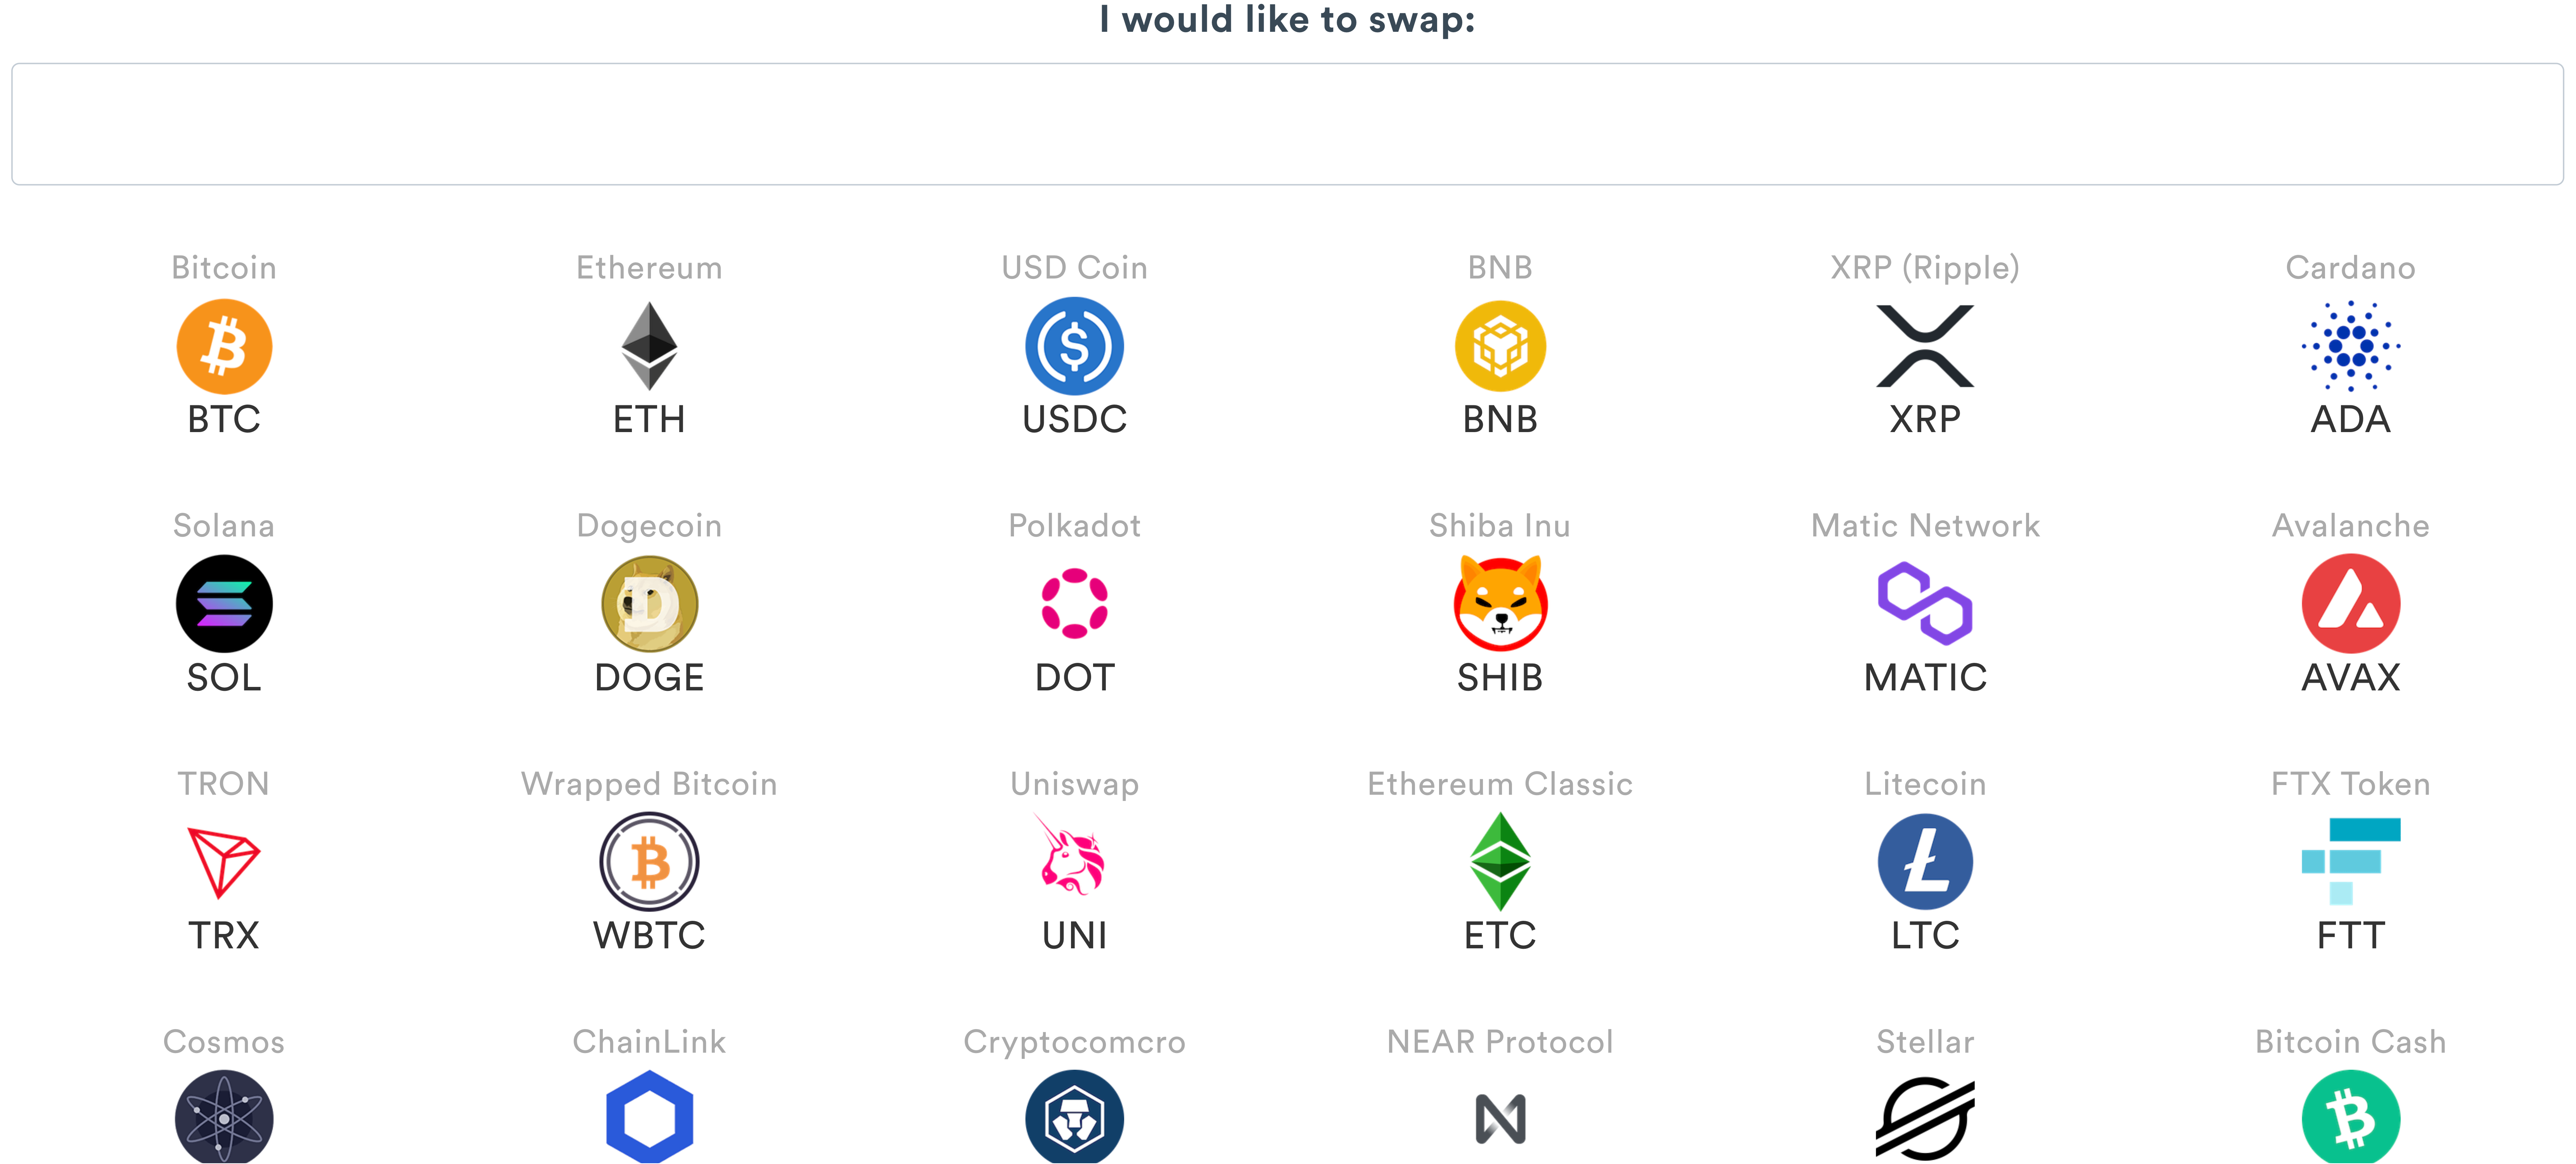 CoinSwap_-_Swap_Page_v2.png